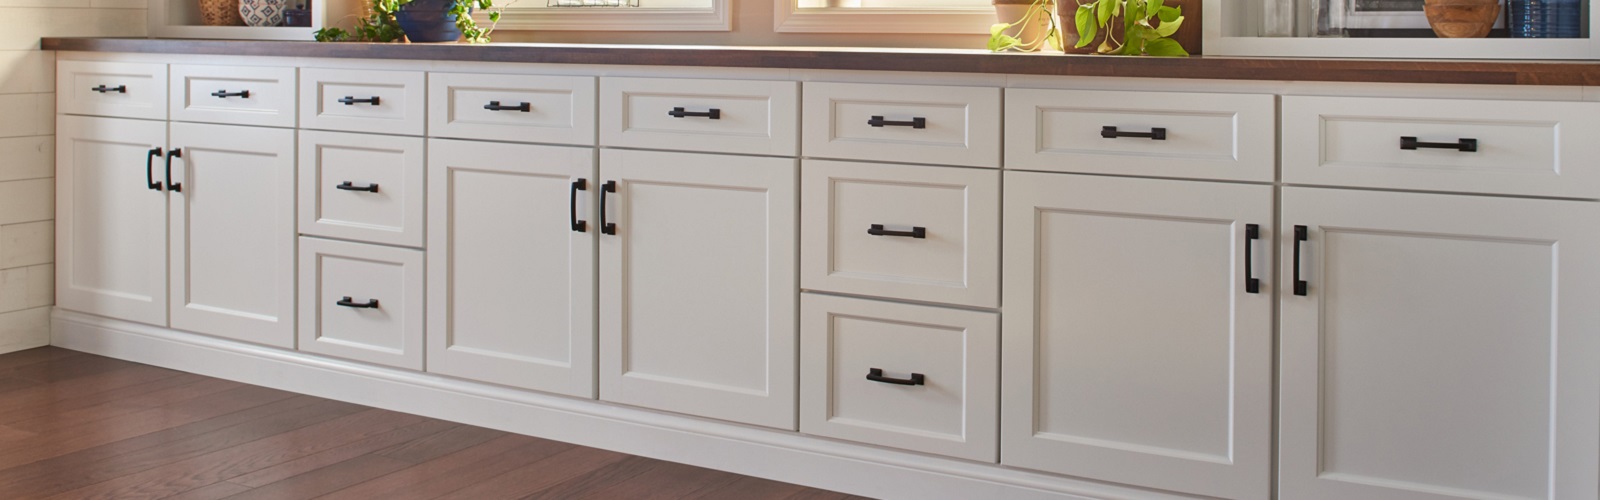 https://www.wolfhomeproducts.com/wp-content/uploads/2023/04/wolf-cabinetry-doors.jpg